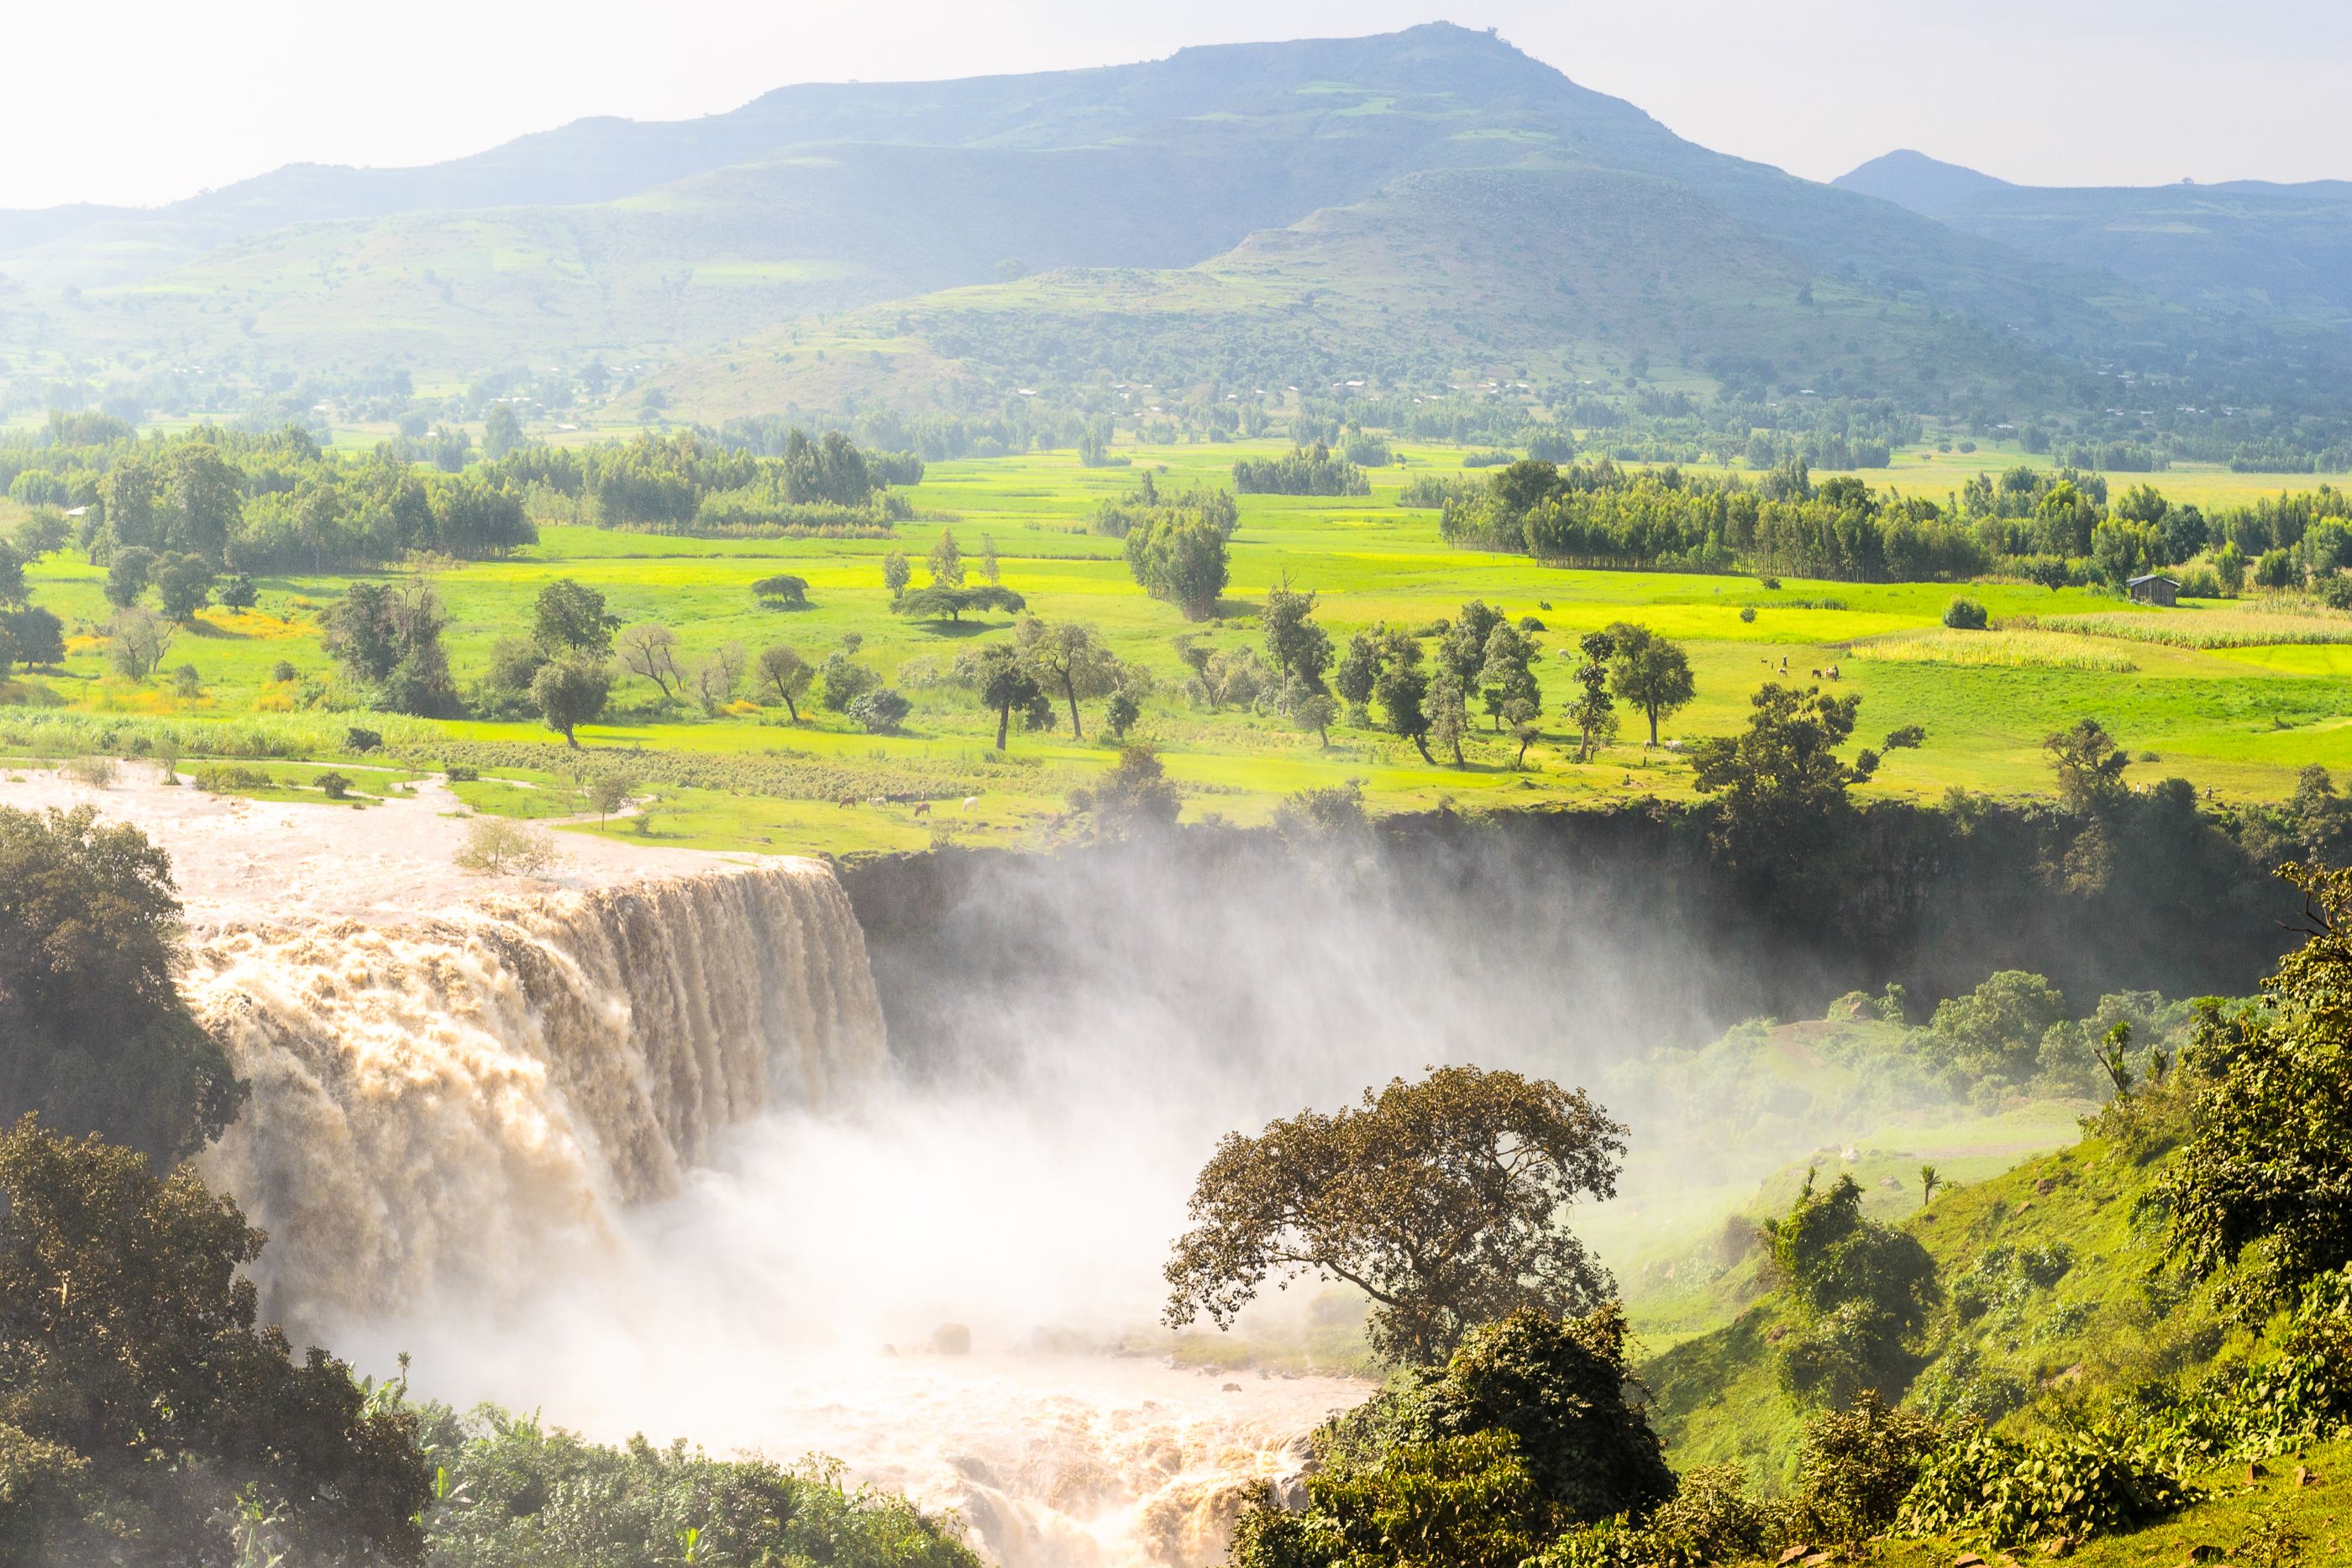 Visit the Blue Nile on a luxury Ethiopia holiday